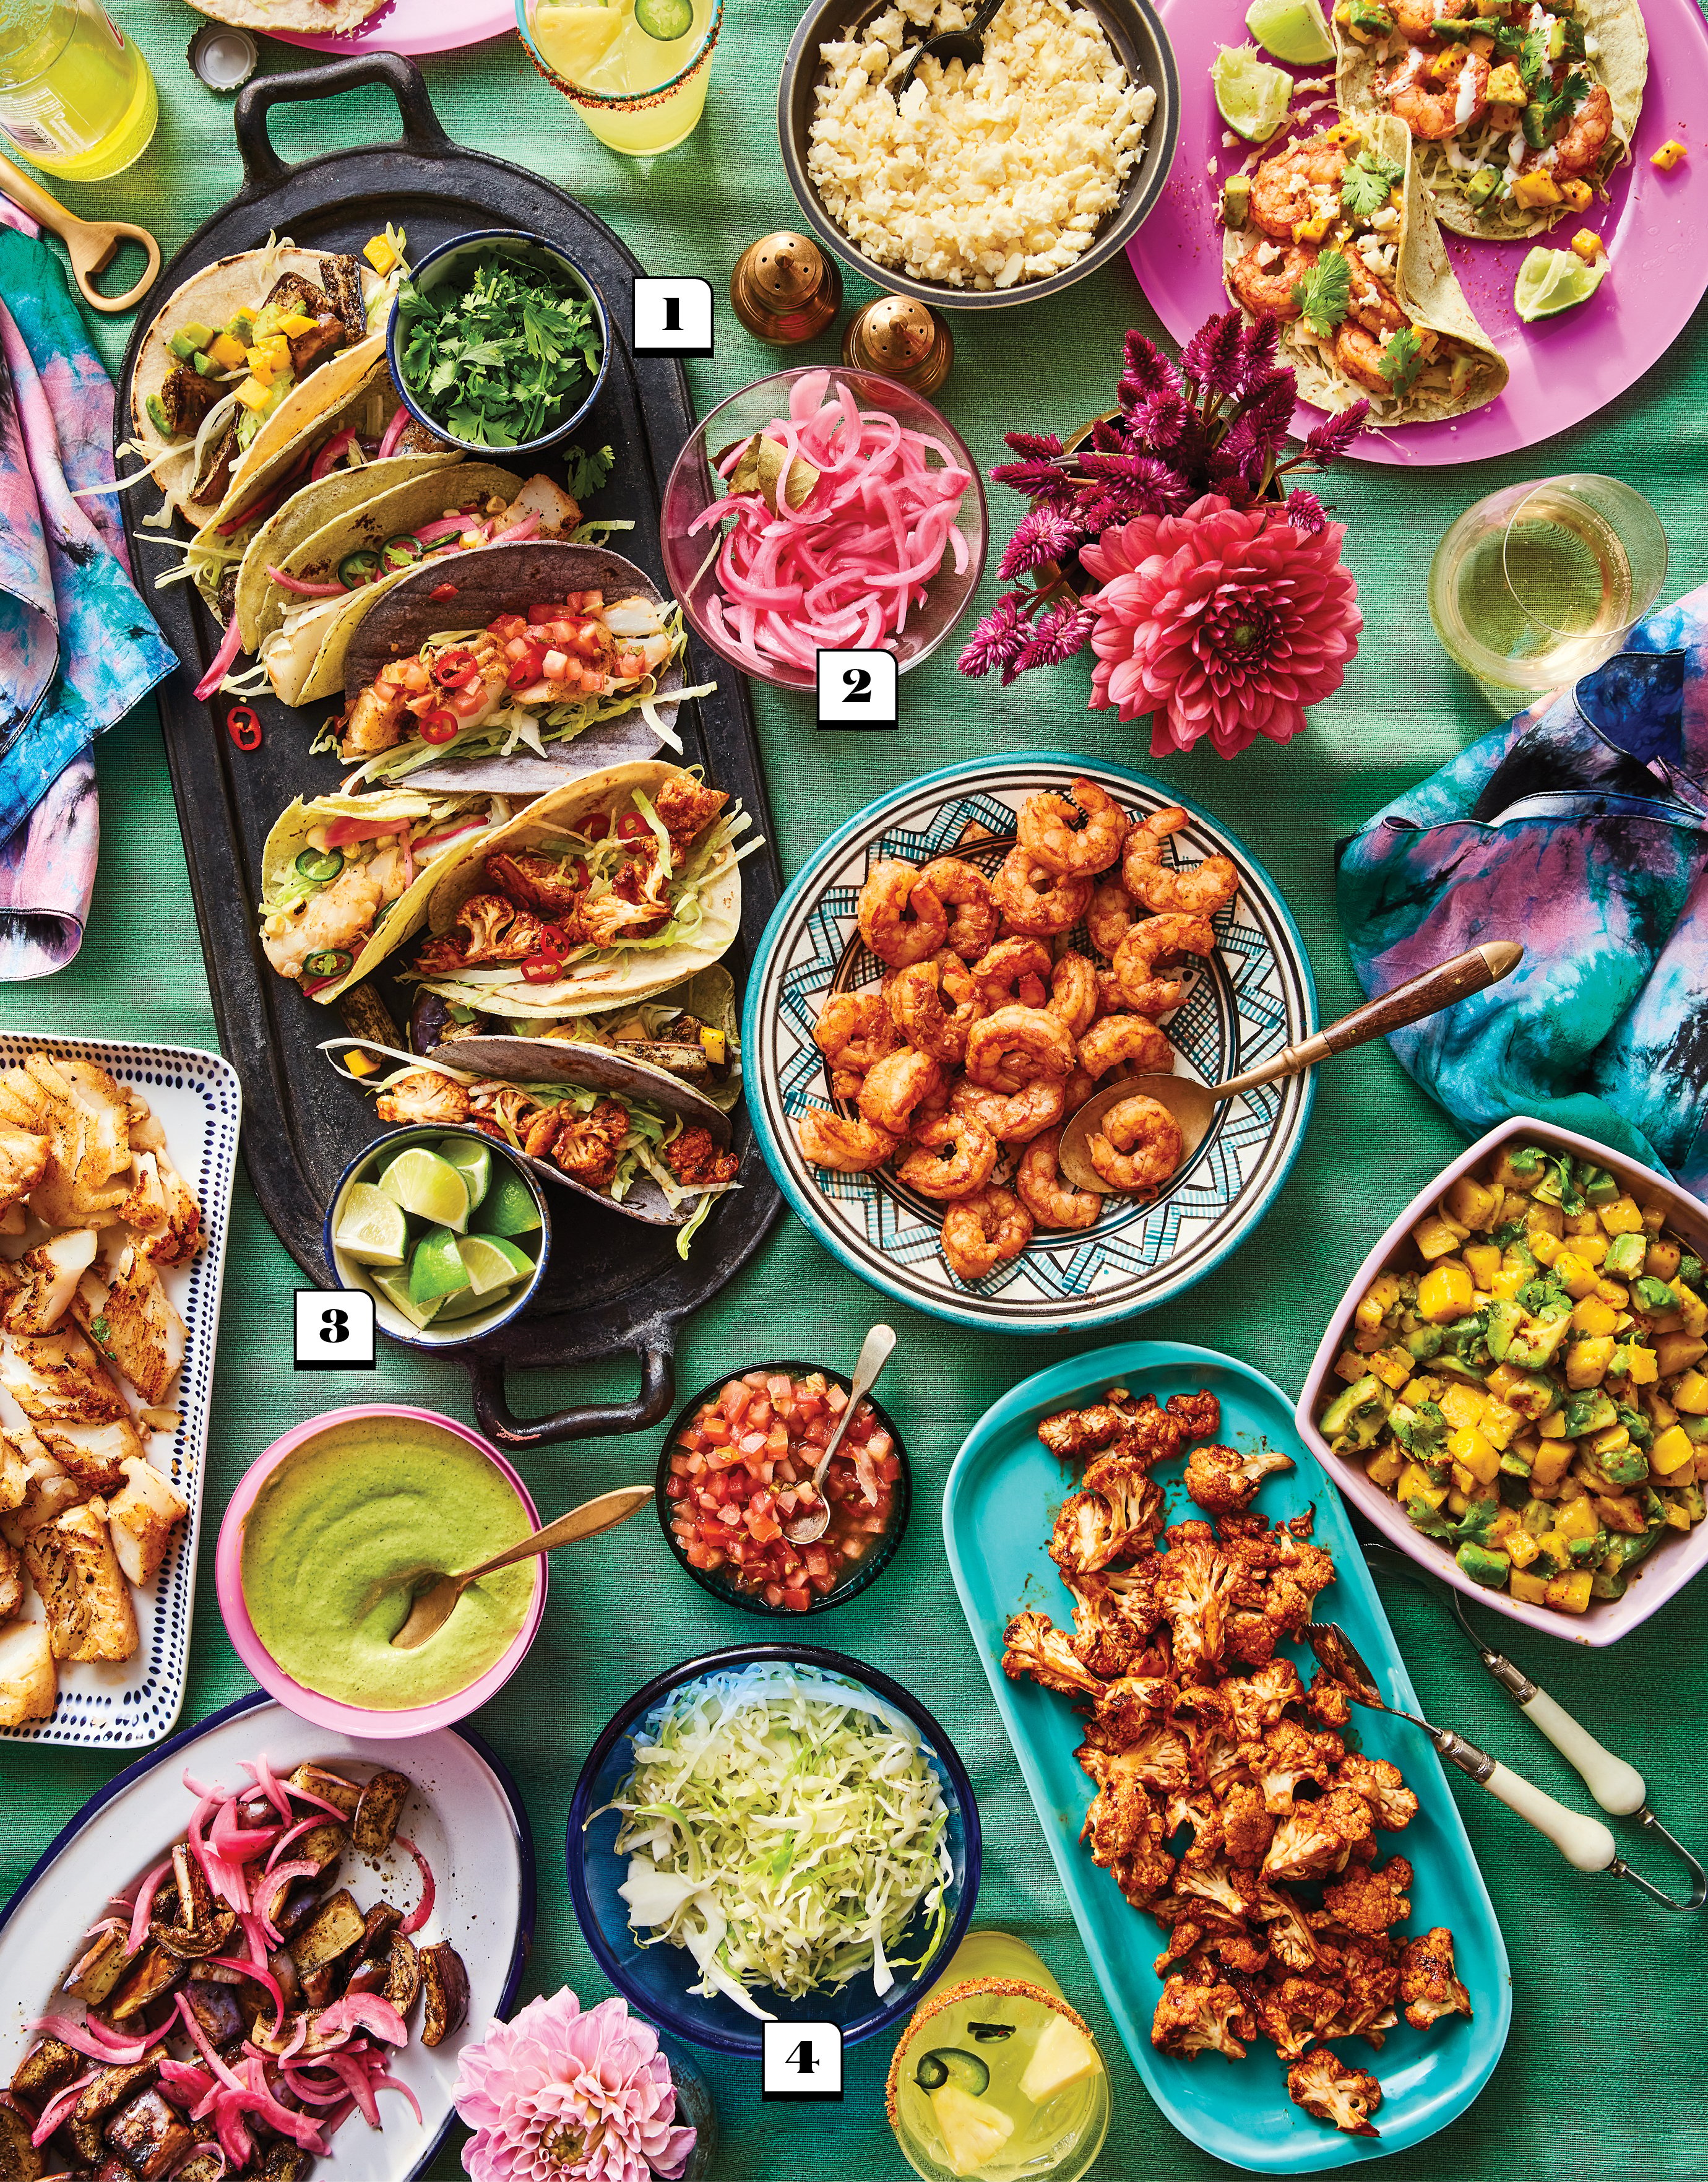 An array of tacos, drinks, and components, including pickled red onions, shrimp, salsa and shredded cabbage, laid out on a teal tablecloth